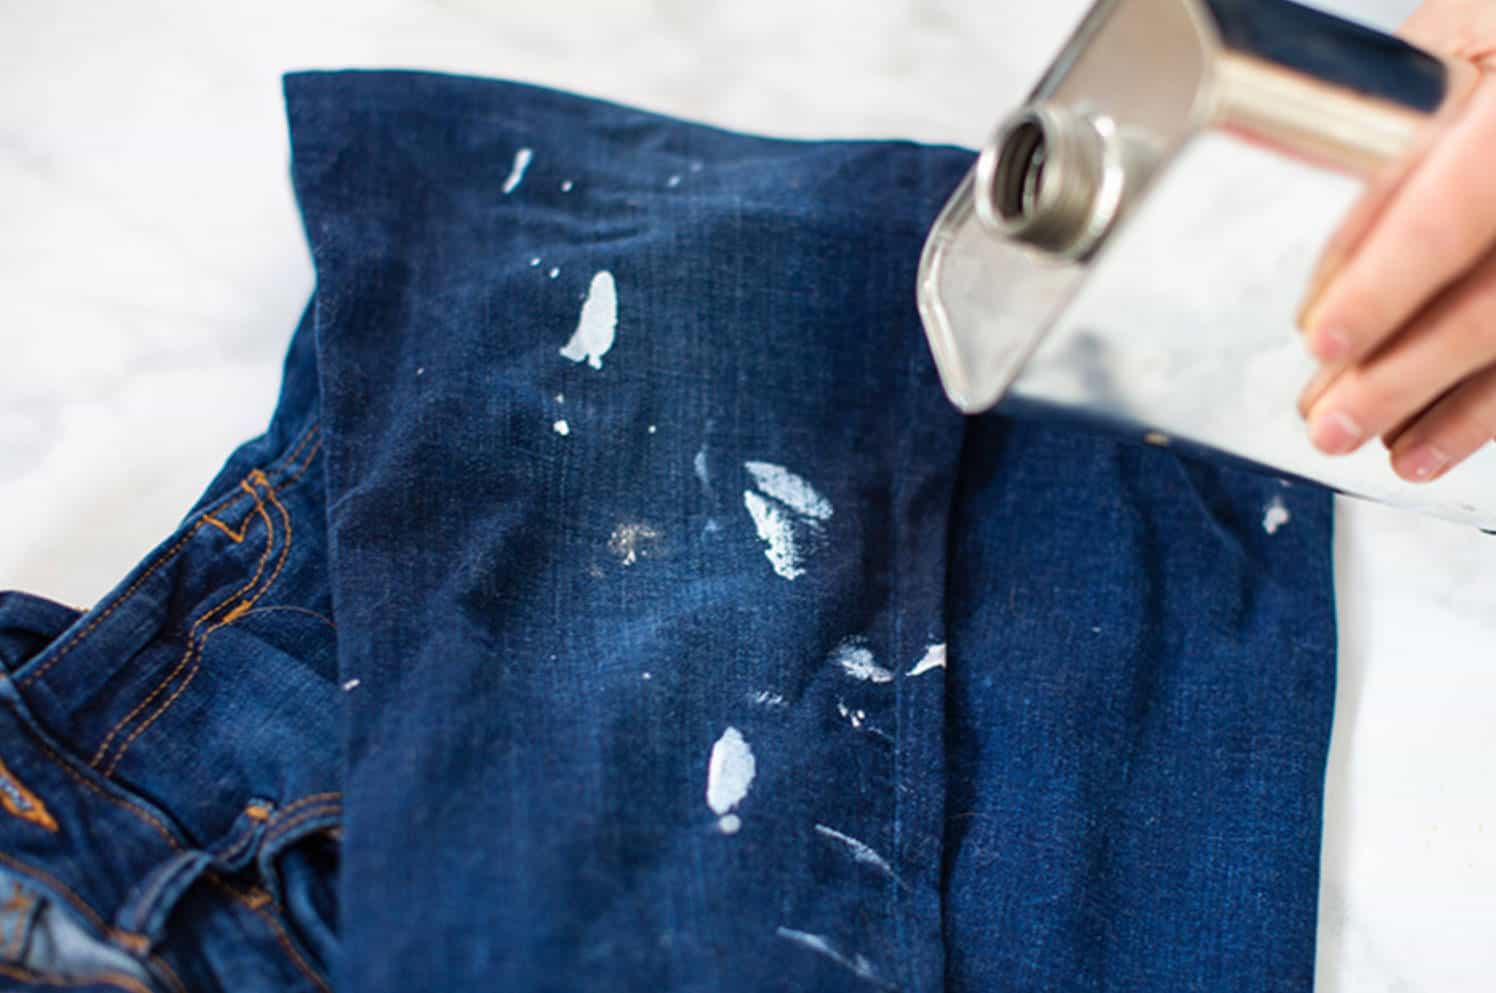 How To Get Caulk Out Of Clothes? (Step-By-Step Guide)